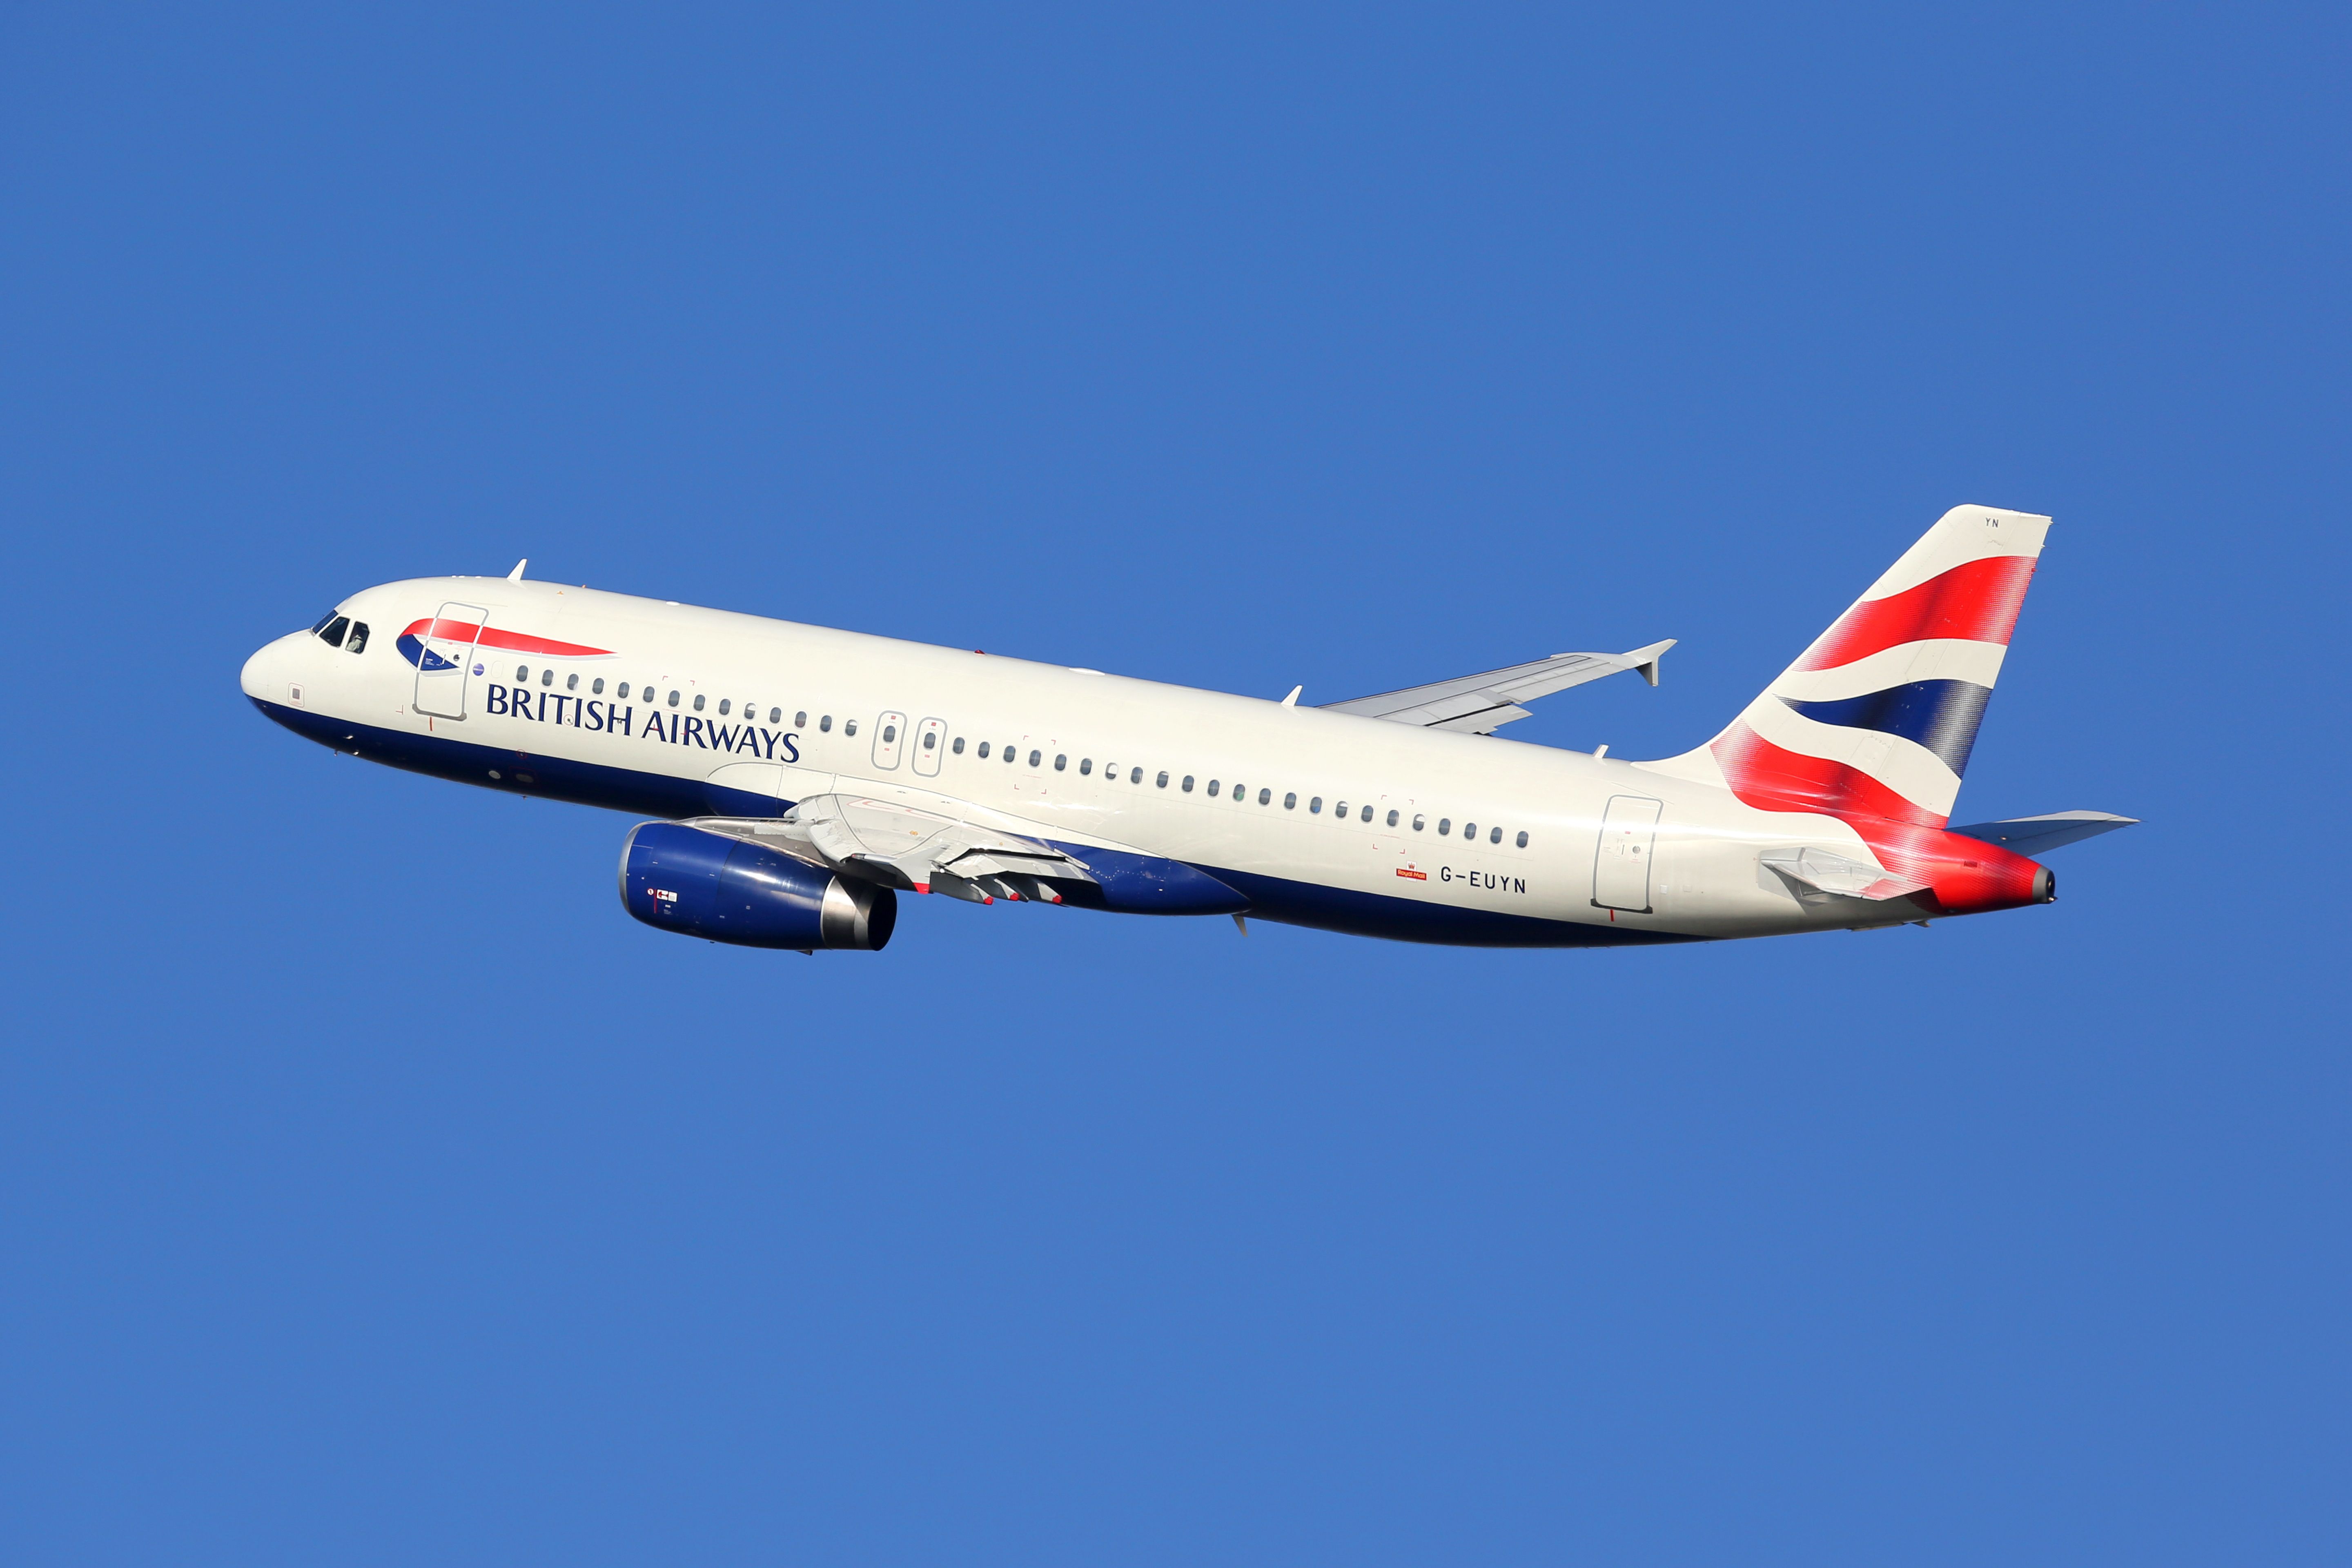 A British Airways Airbus A320 Flying in the sky.